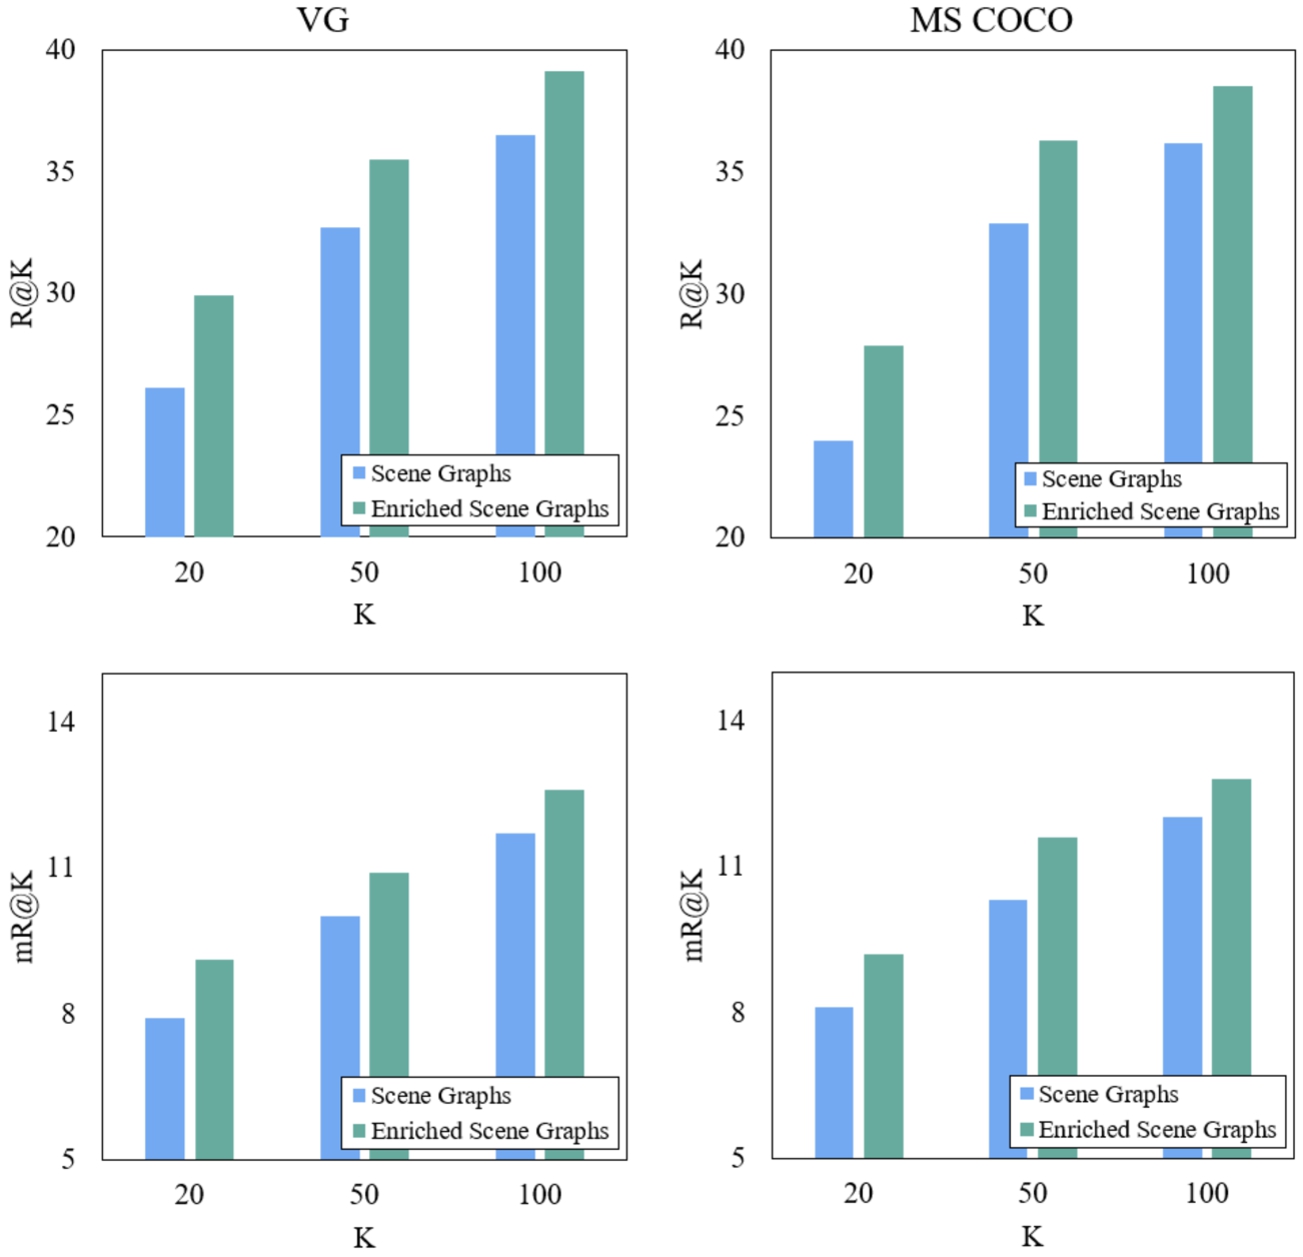 Comparison of conventional and enriched scene graphs on VG and COCO datasets using recall rates R@K and mR@K.